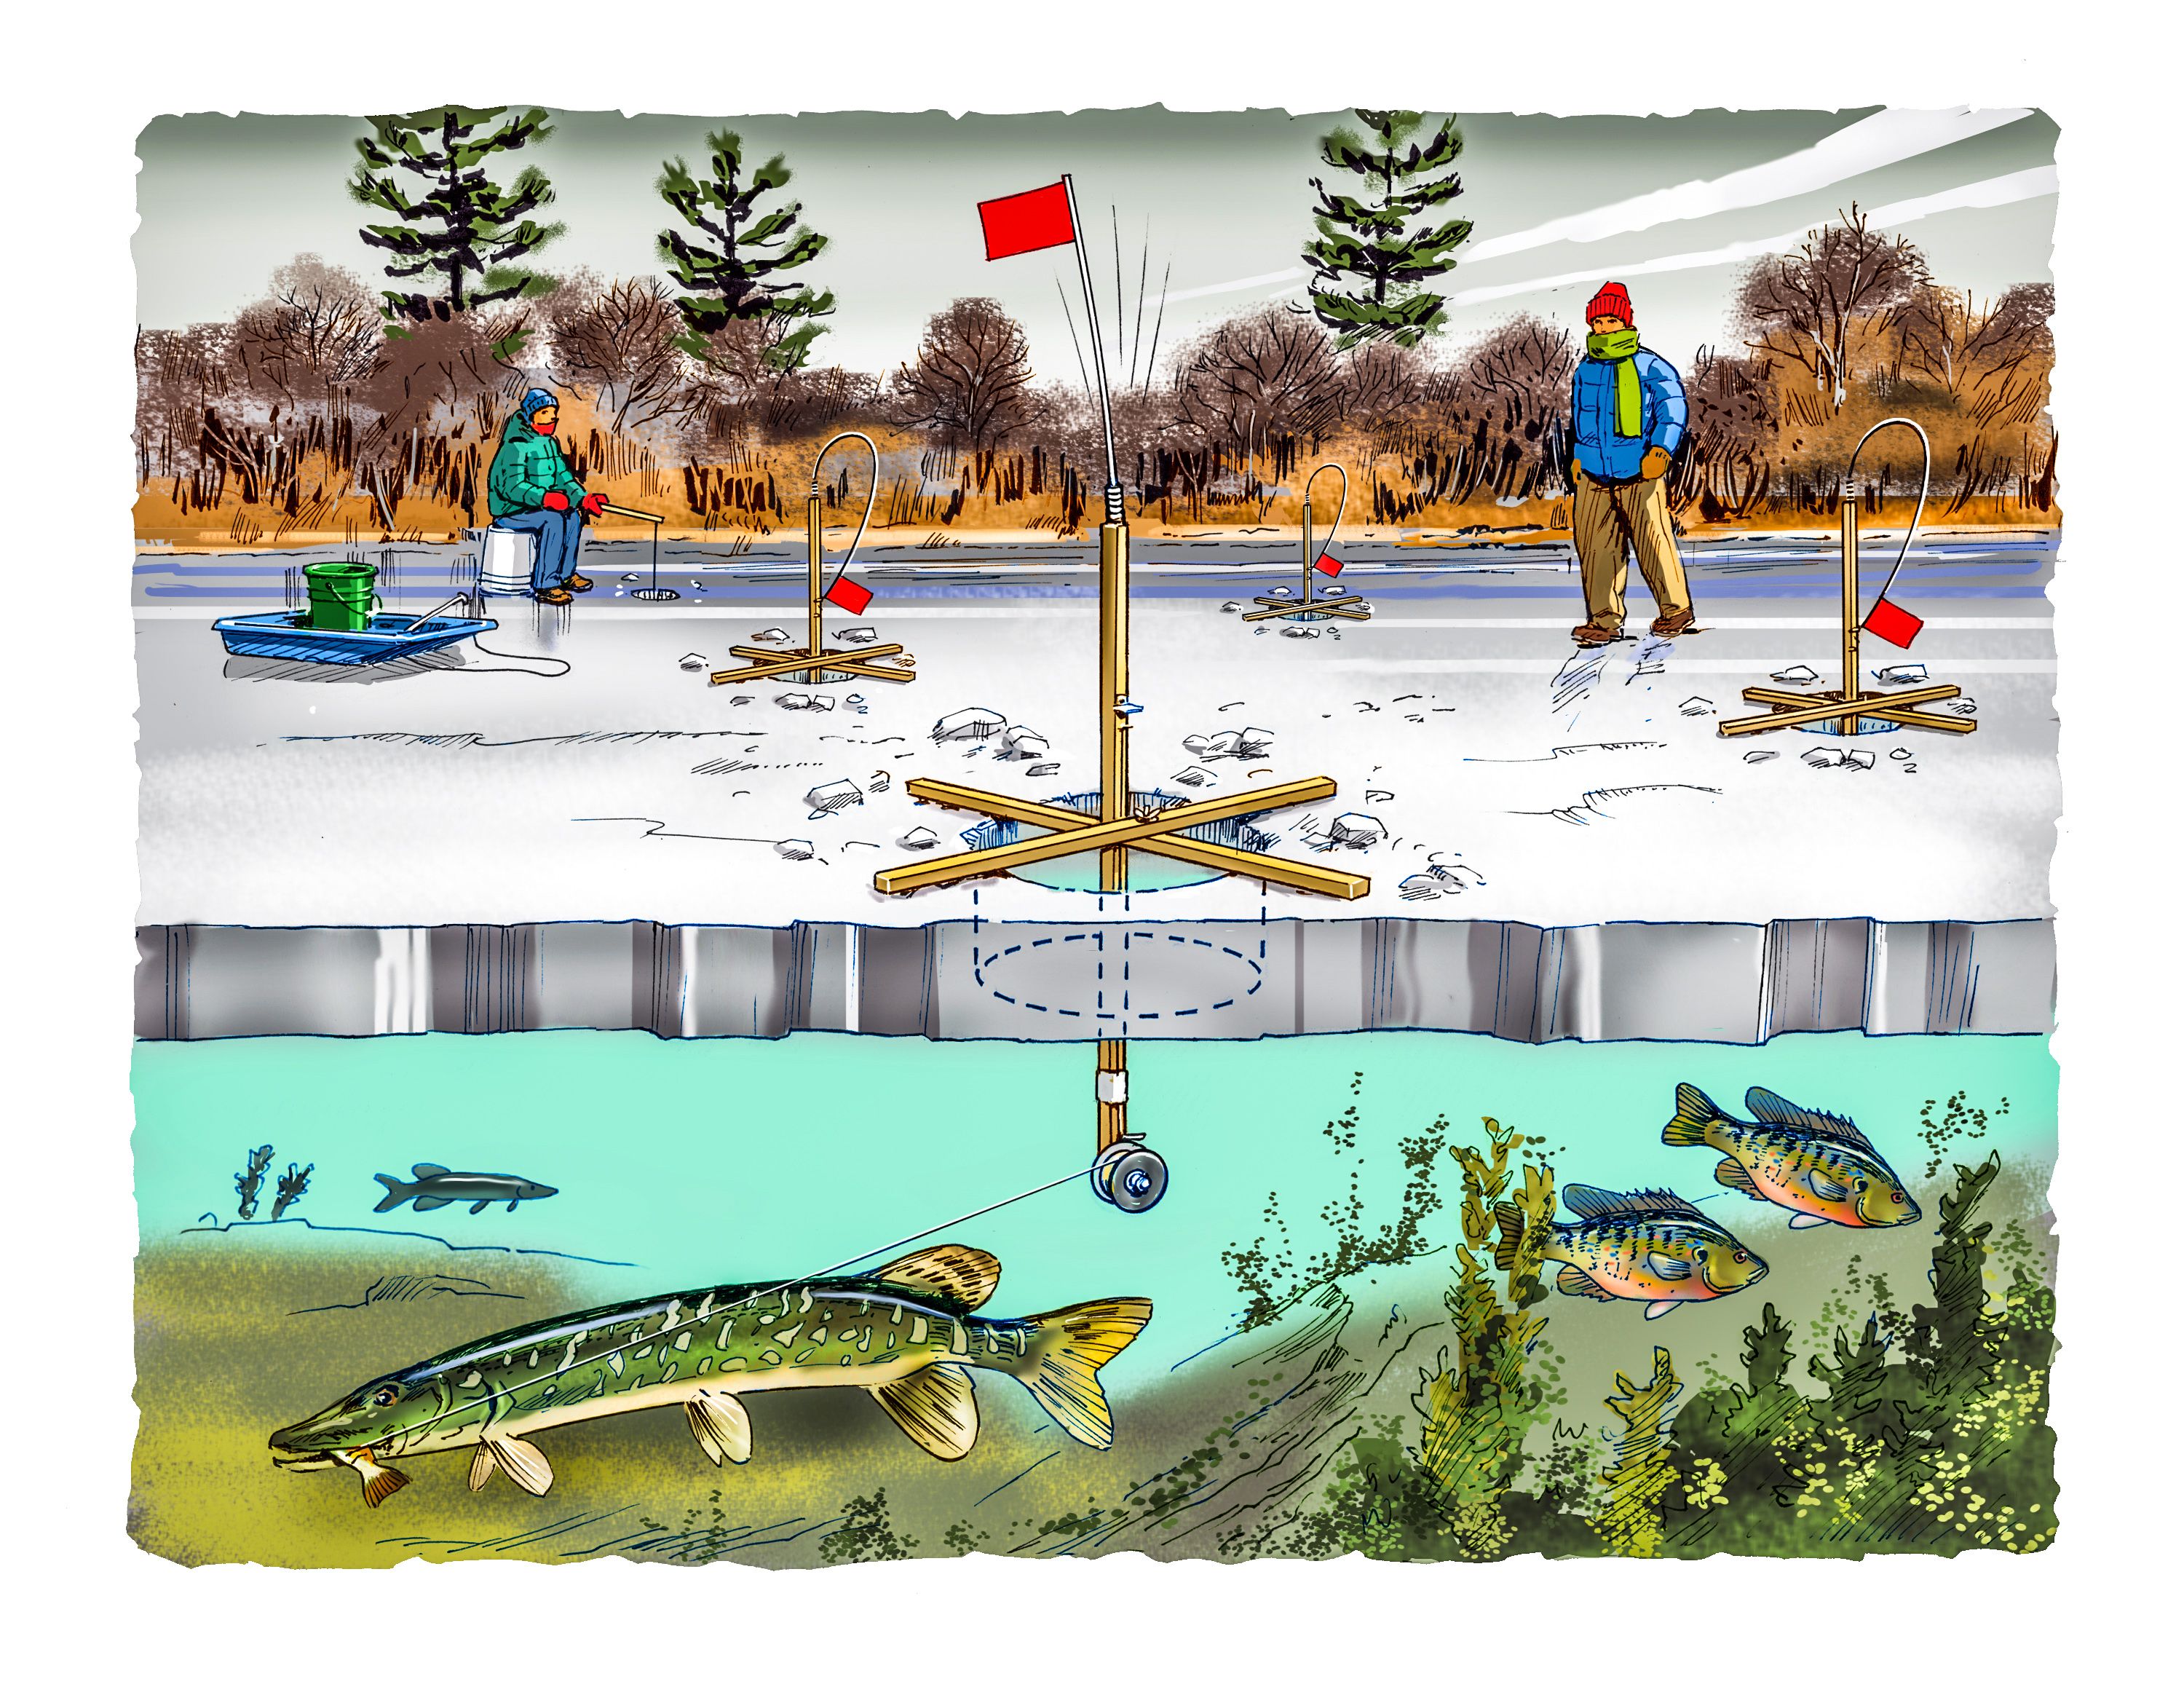 How To Get Started in Ice Fishing